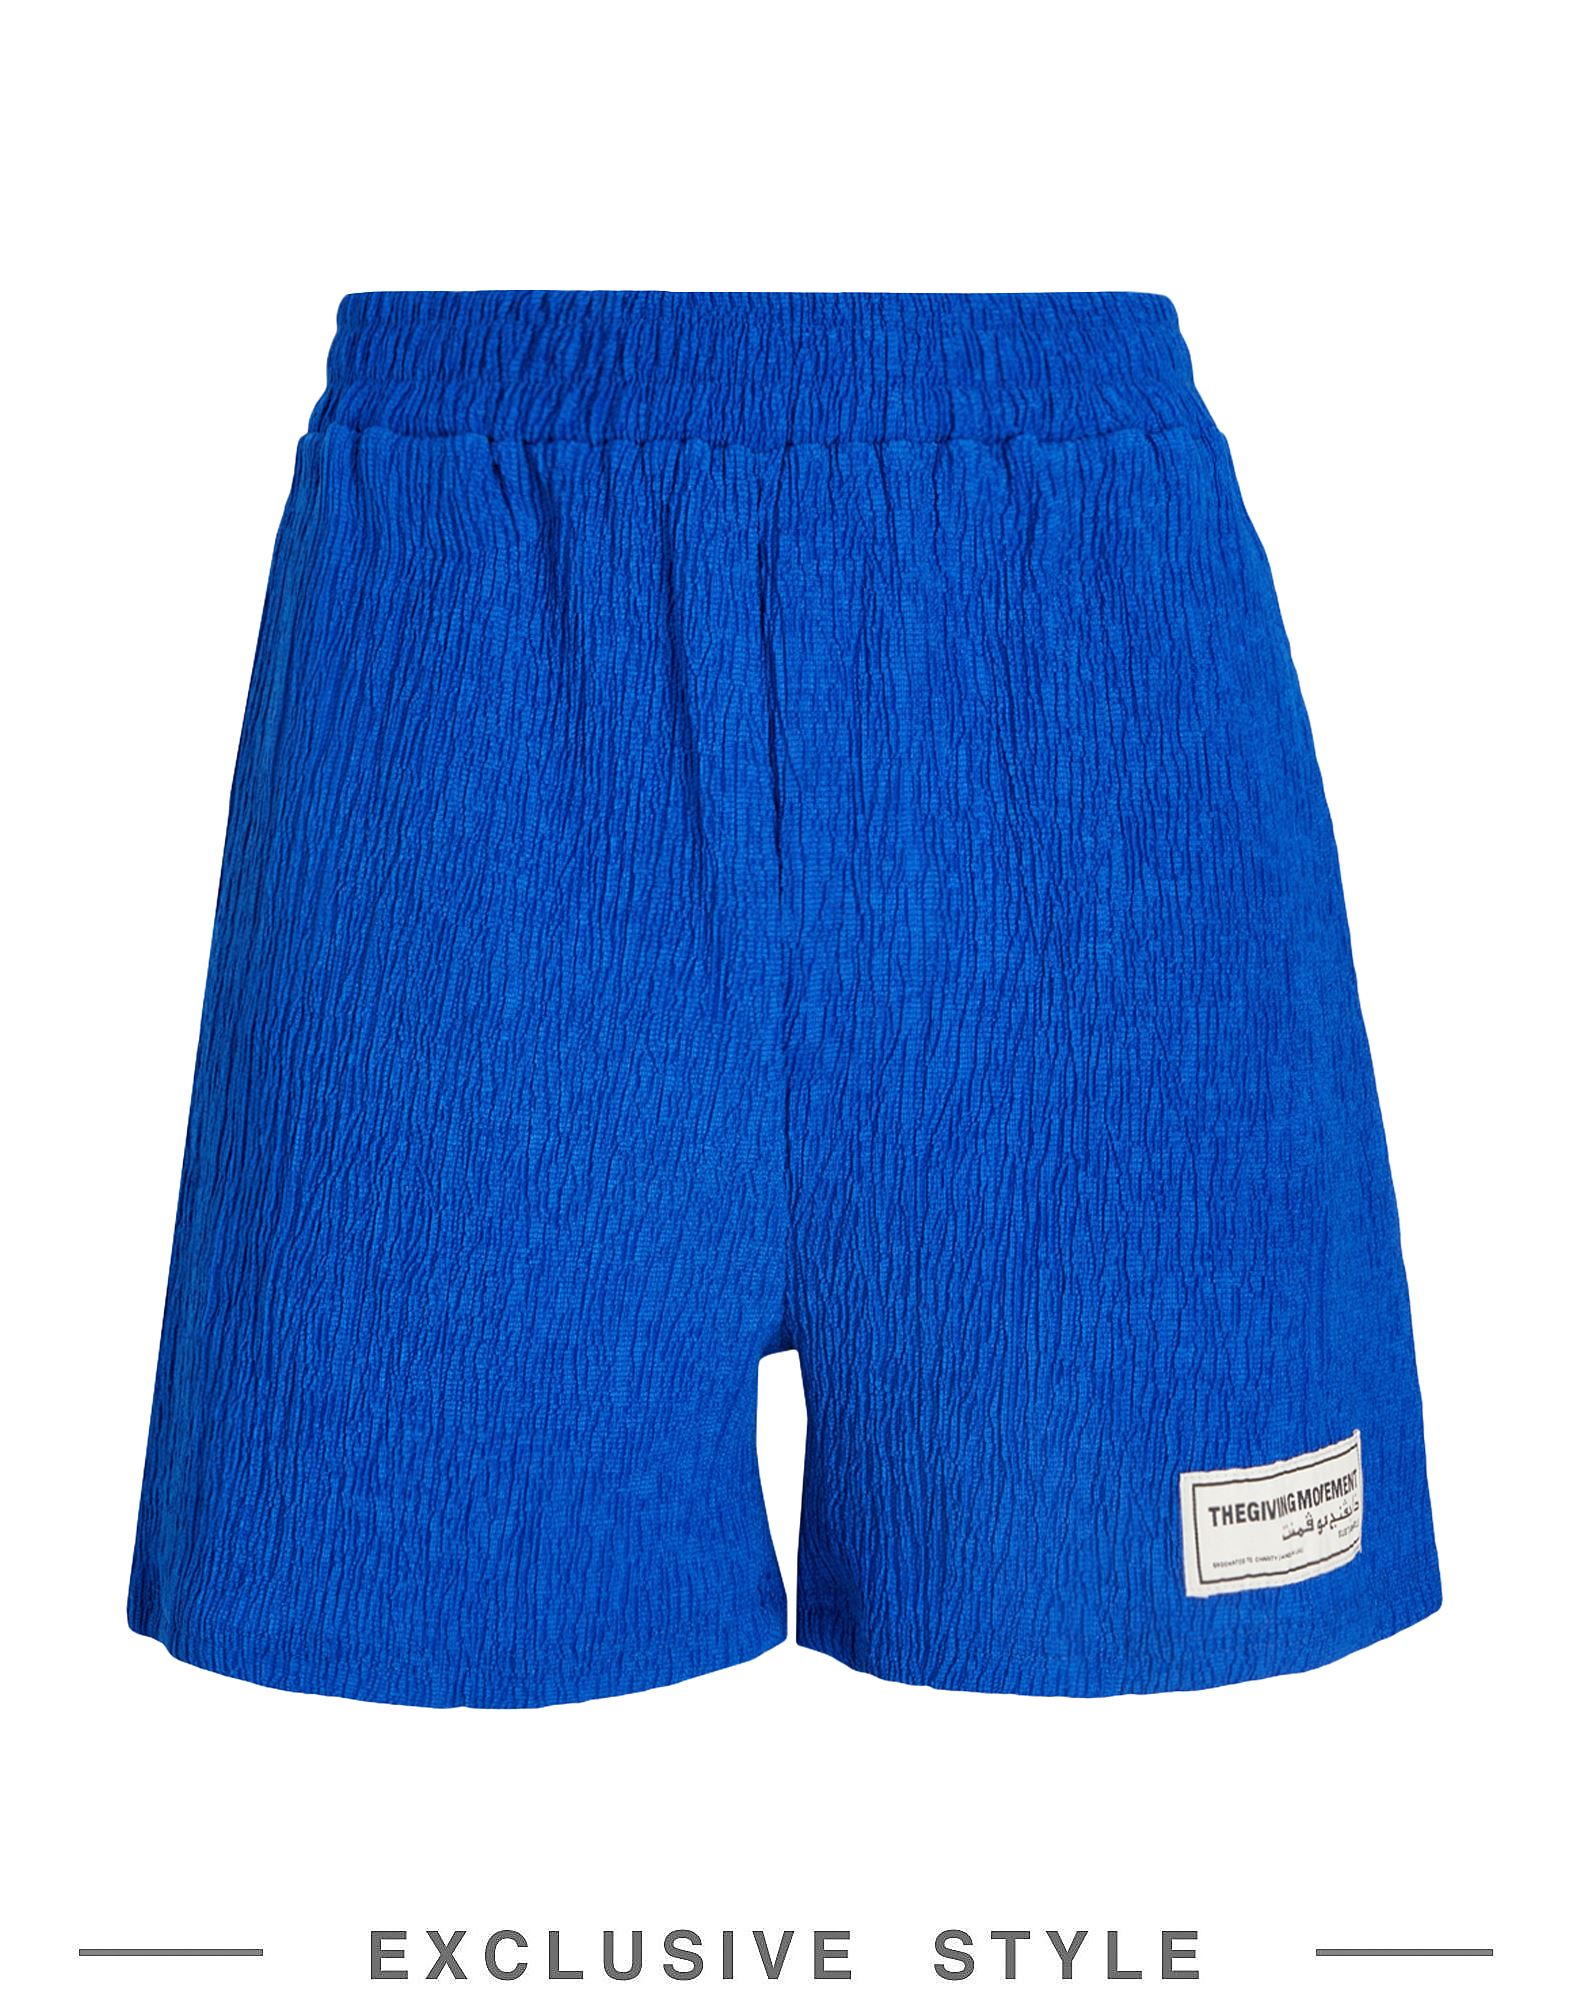 The Giving Movement X Yoox Woman Shorts & Bermuda Shorts Bright Blue Size L Recycled Polyester, Recy